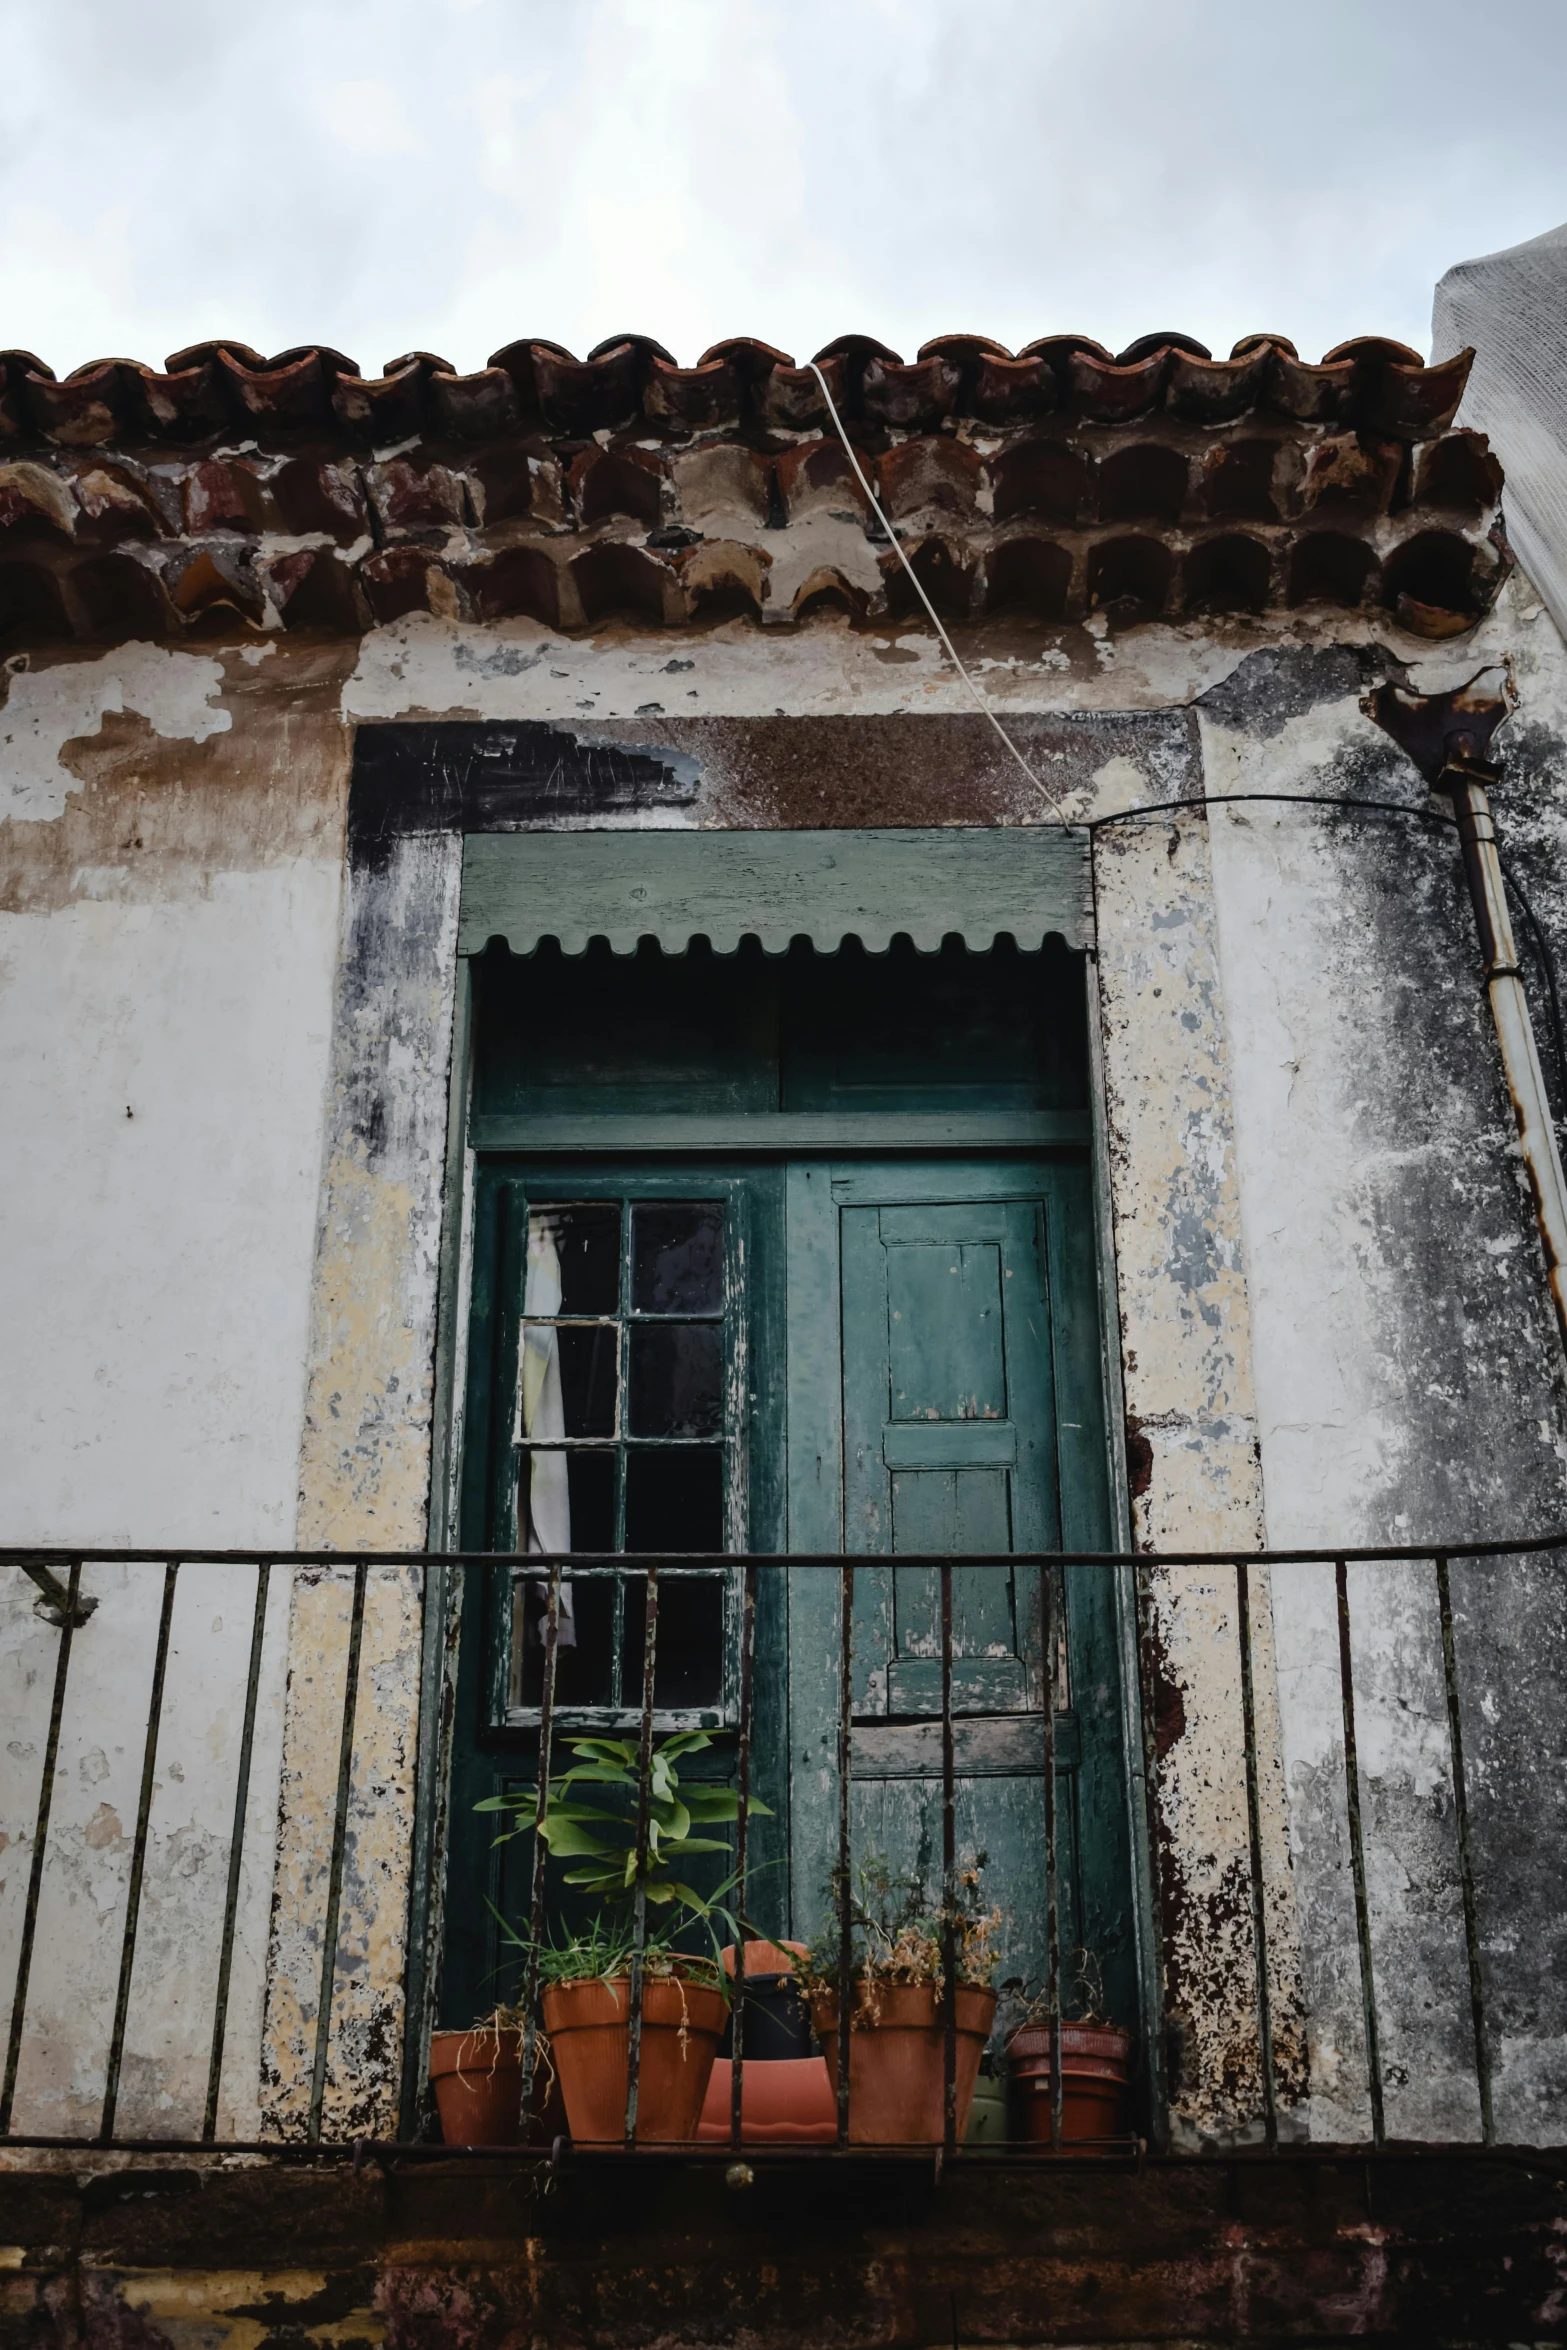 a balcony with potted plants and a green door, an album cover, pexels contest winner, baroque, deteriorated, location ( favela ), green and brown color palette, looking out